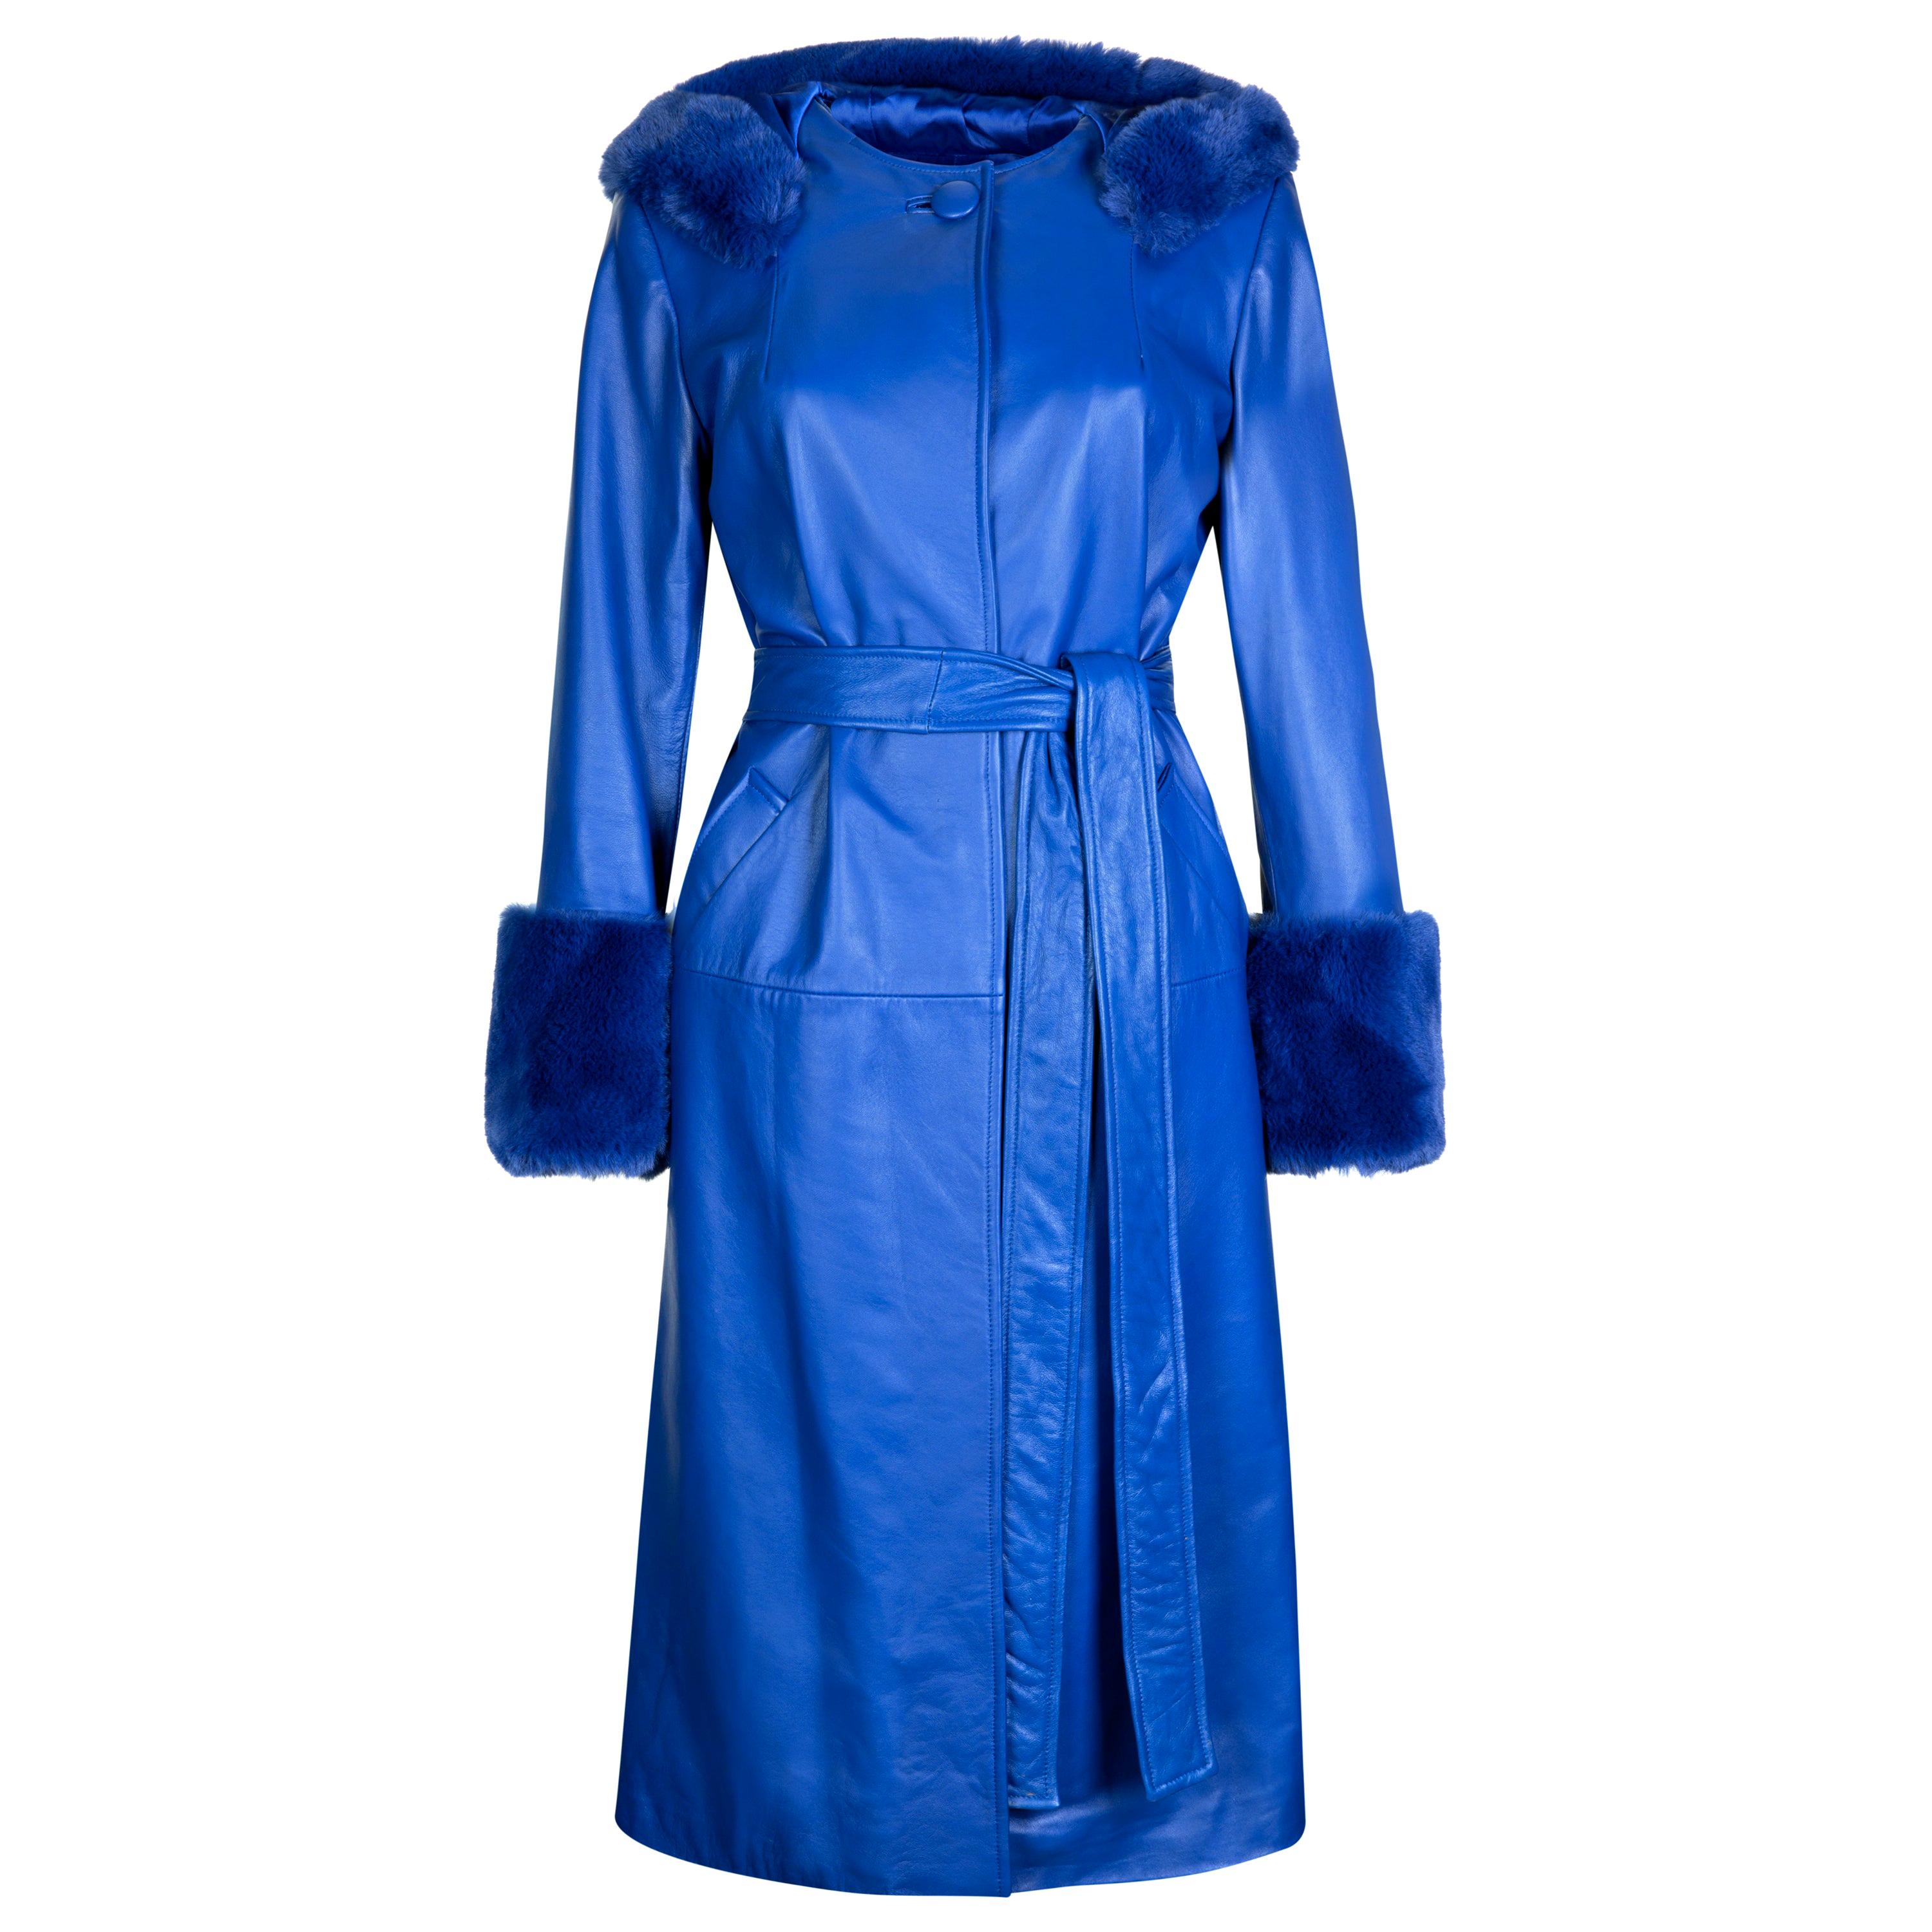 Verheyen London Hooded Leather Trench Coat in Blue with Faux Fur - Size uk 8 